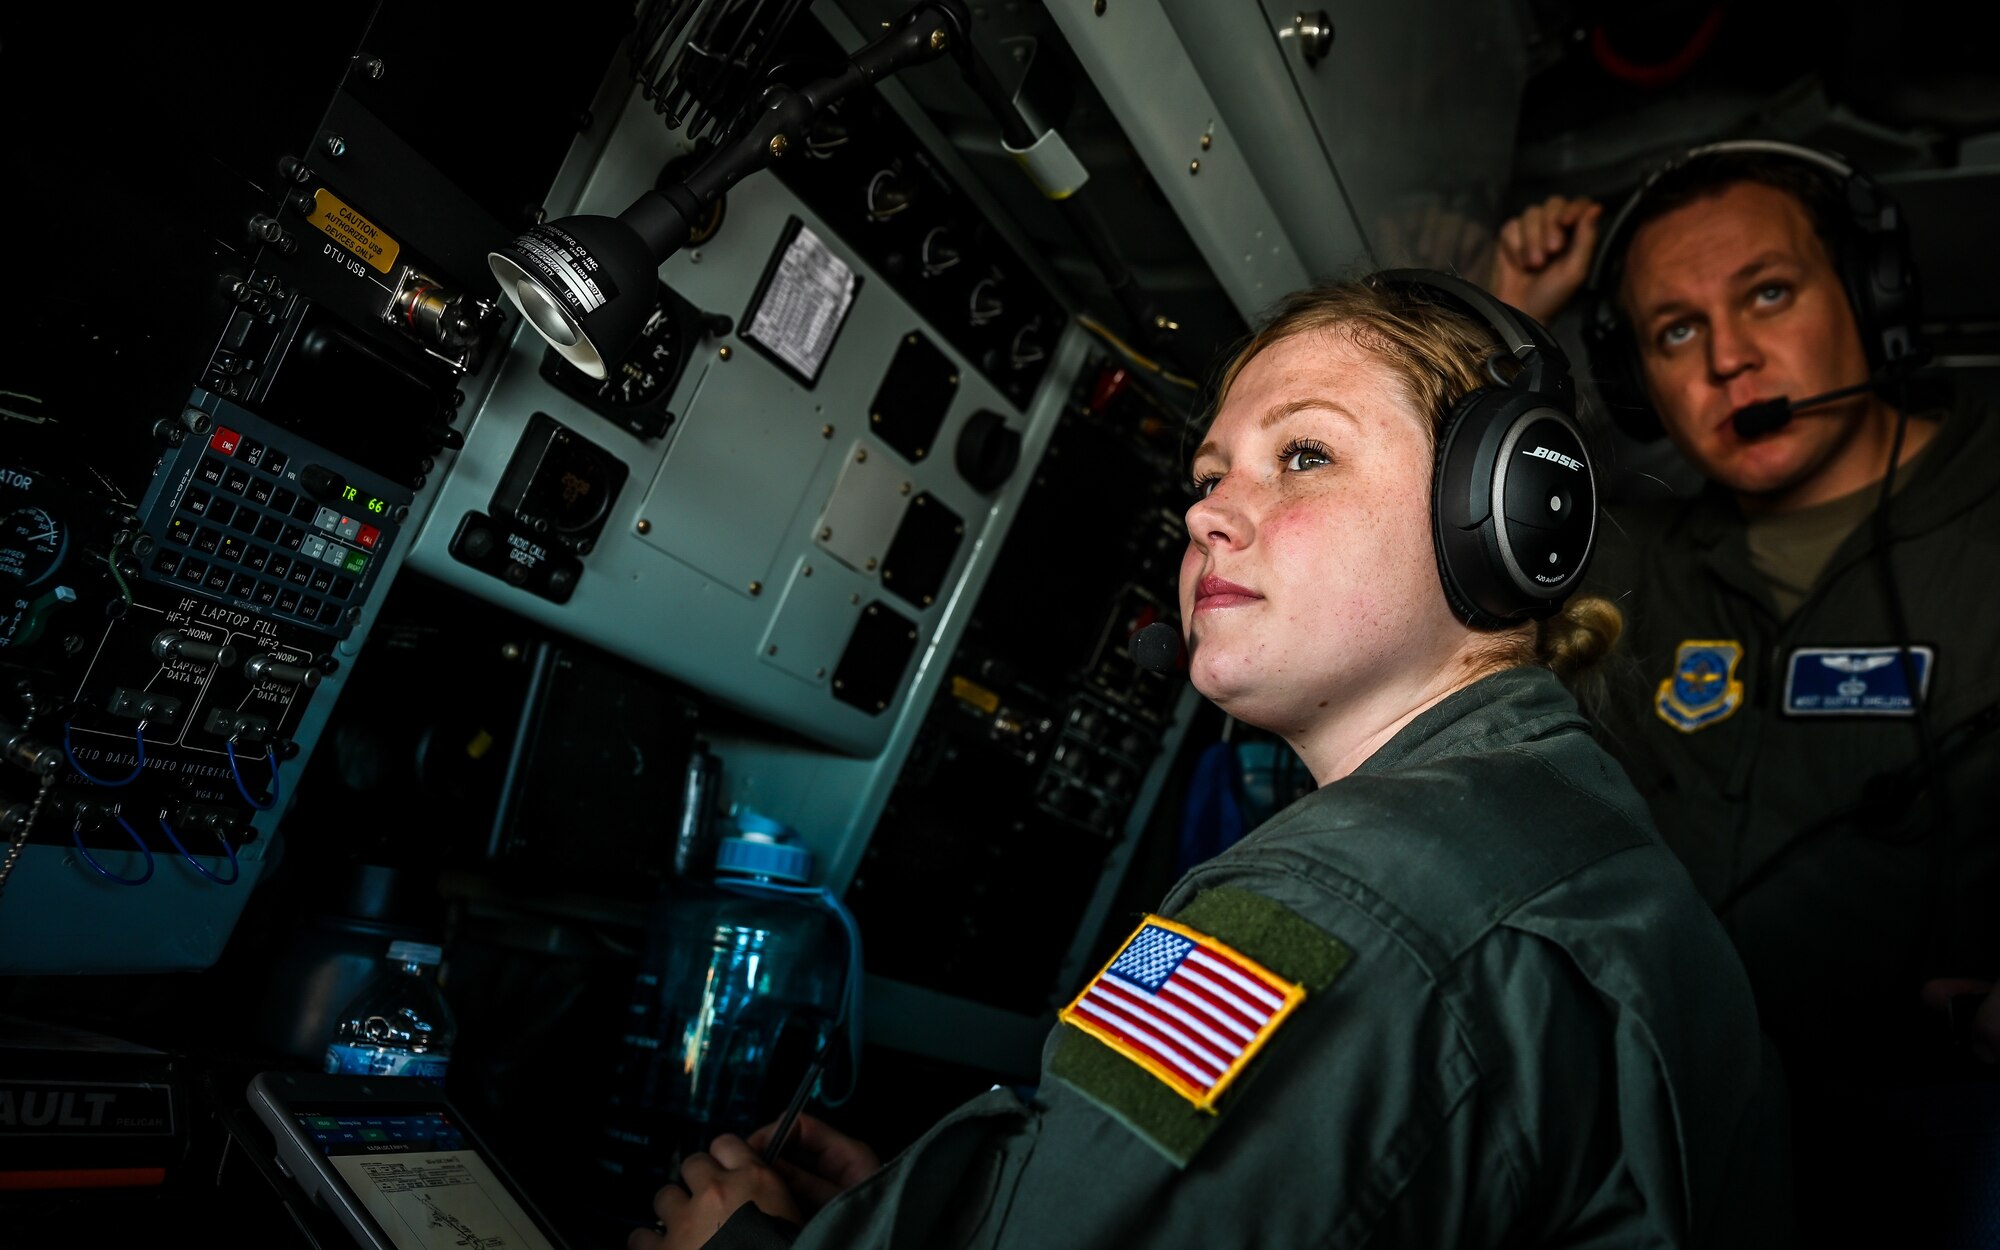 Airman 1st Class Cassandra Wesley, a 91st Air Refueling Squadron boom operator, trains alongside Master Sergeant Dustin Sheldon, a 91st ARS in-flight refueling instructor, during week-long integrated training at Barksdale Air Force Base, La., Dec. 14, 2020.